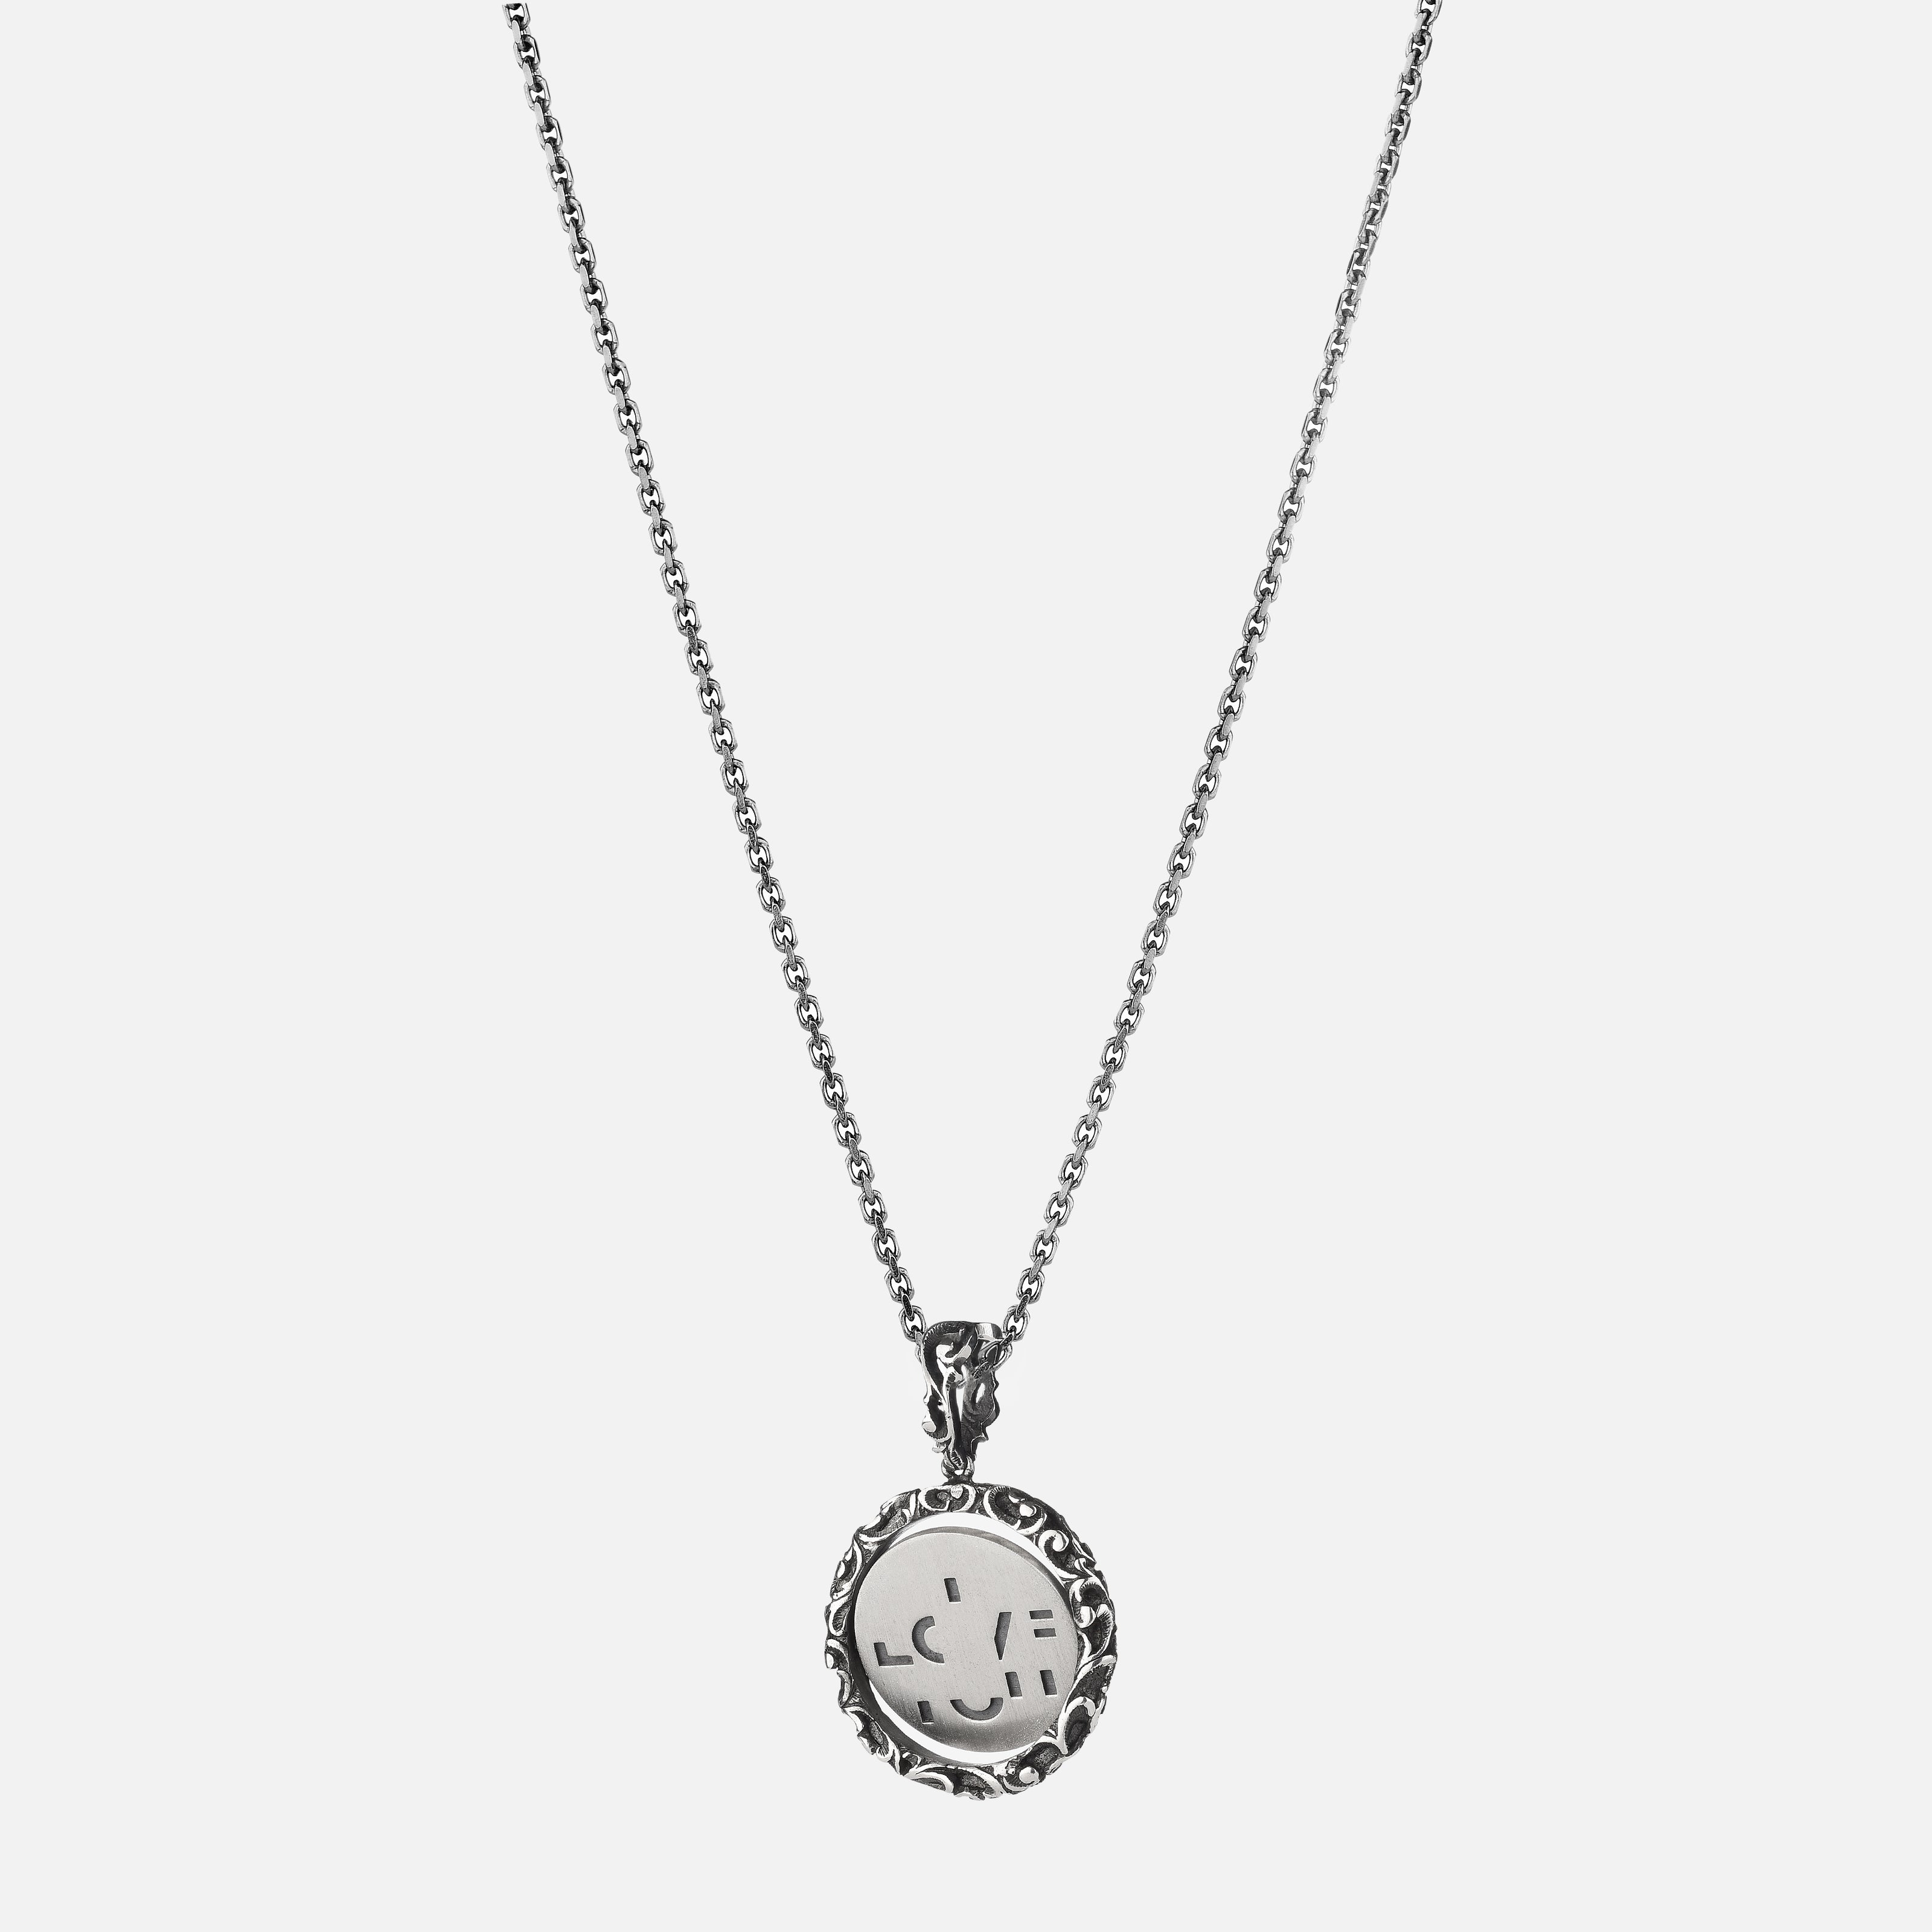 Shakti necklace, coin pendant with satin internal plate and writing